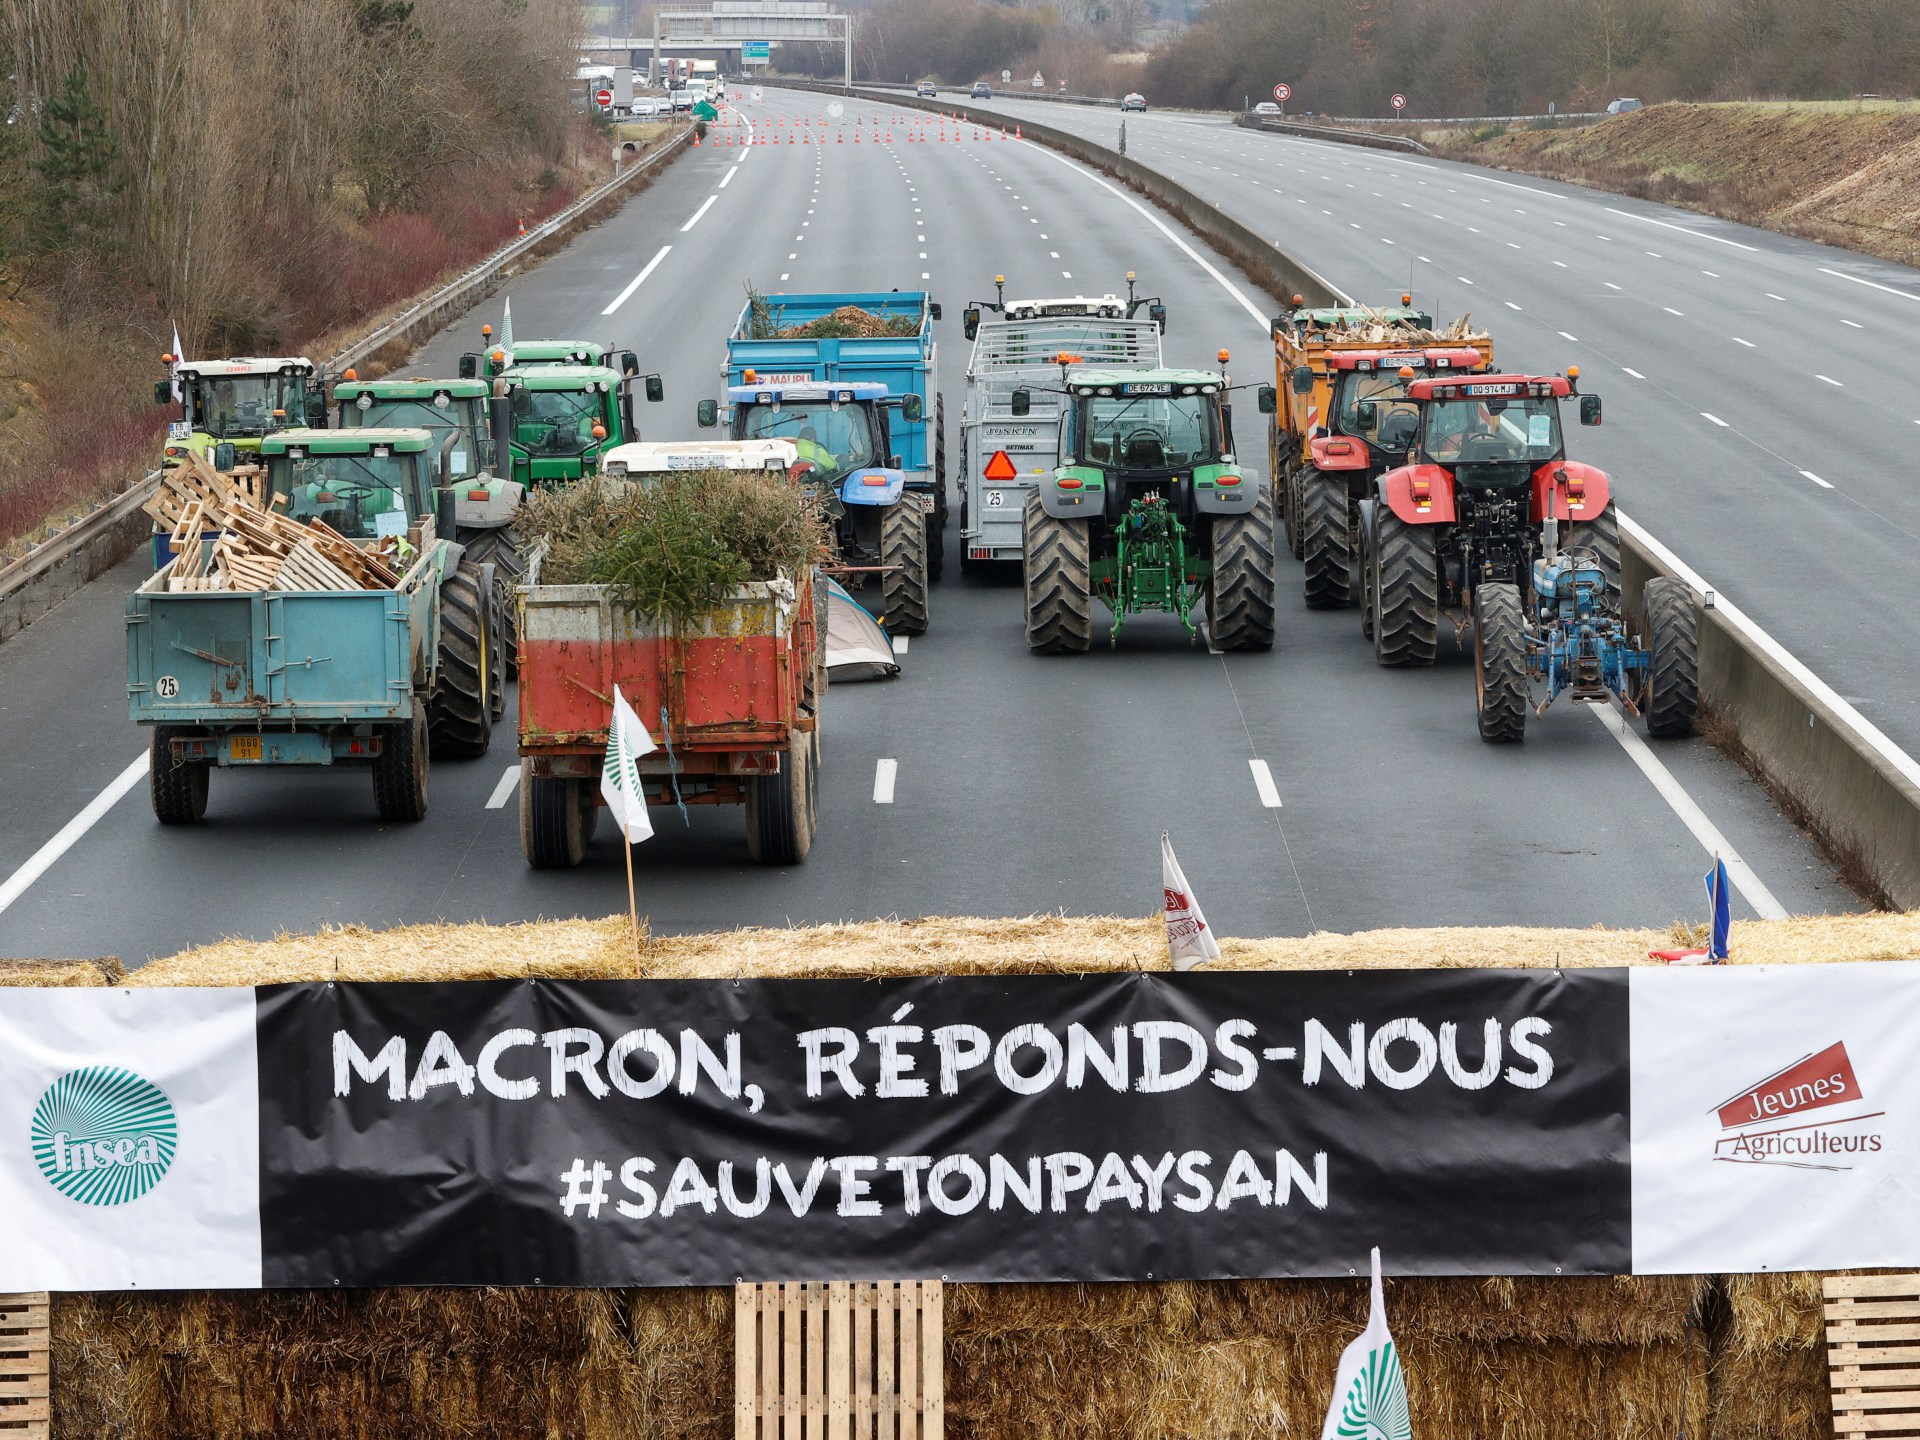 France announces new measures in bid to quell farmers protests